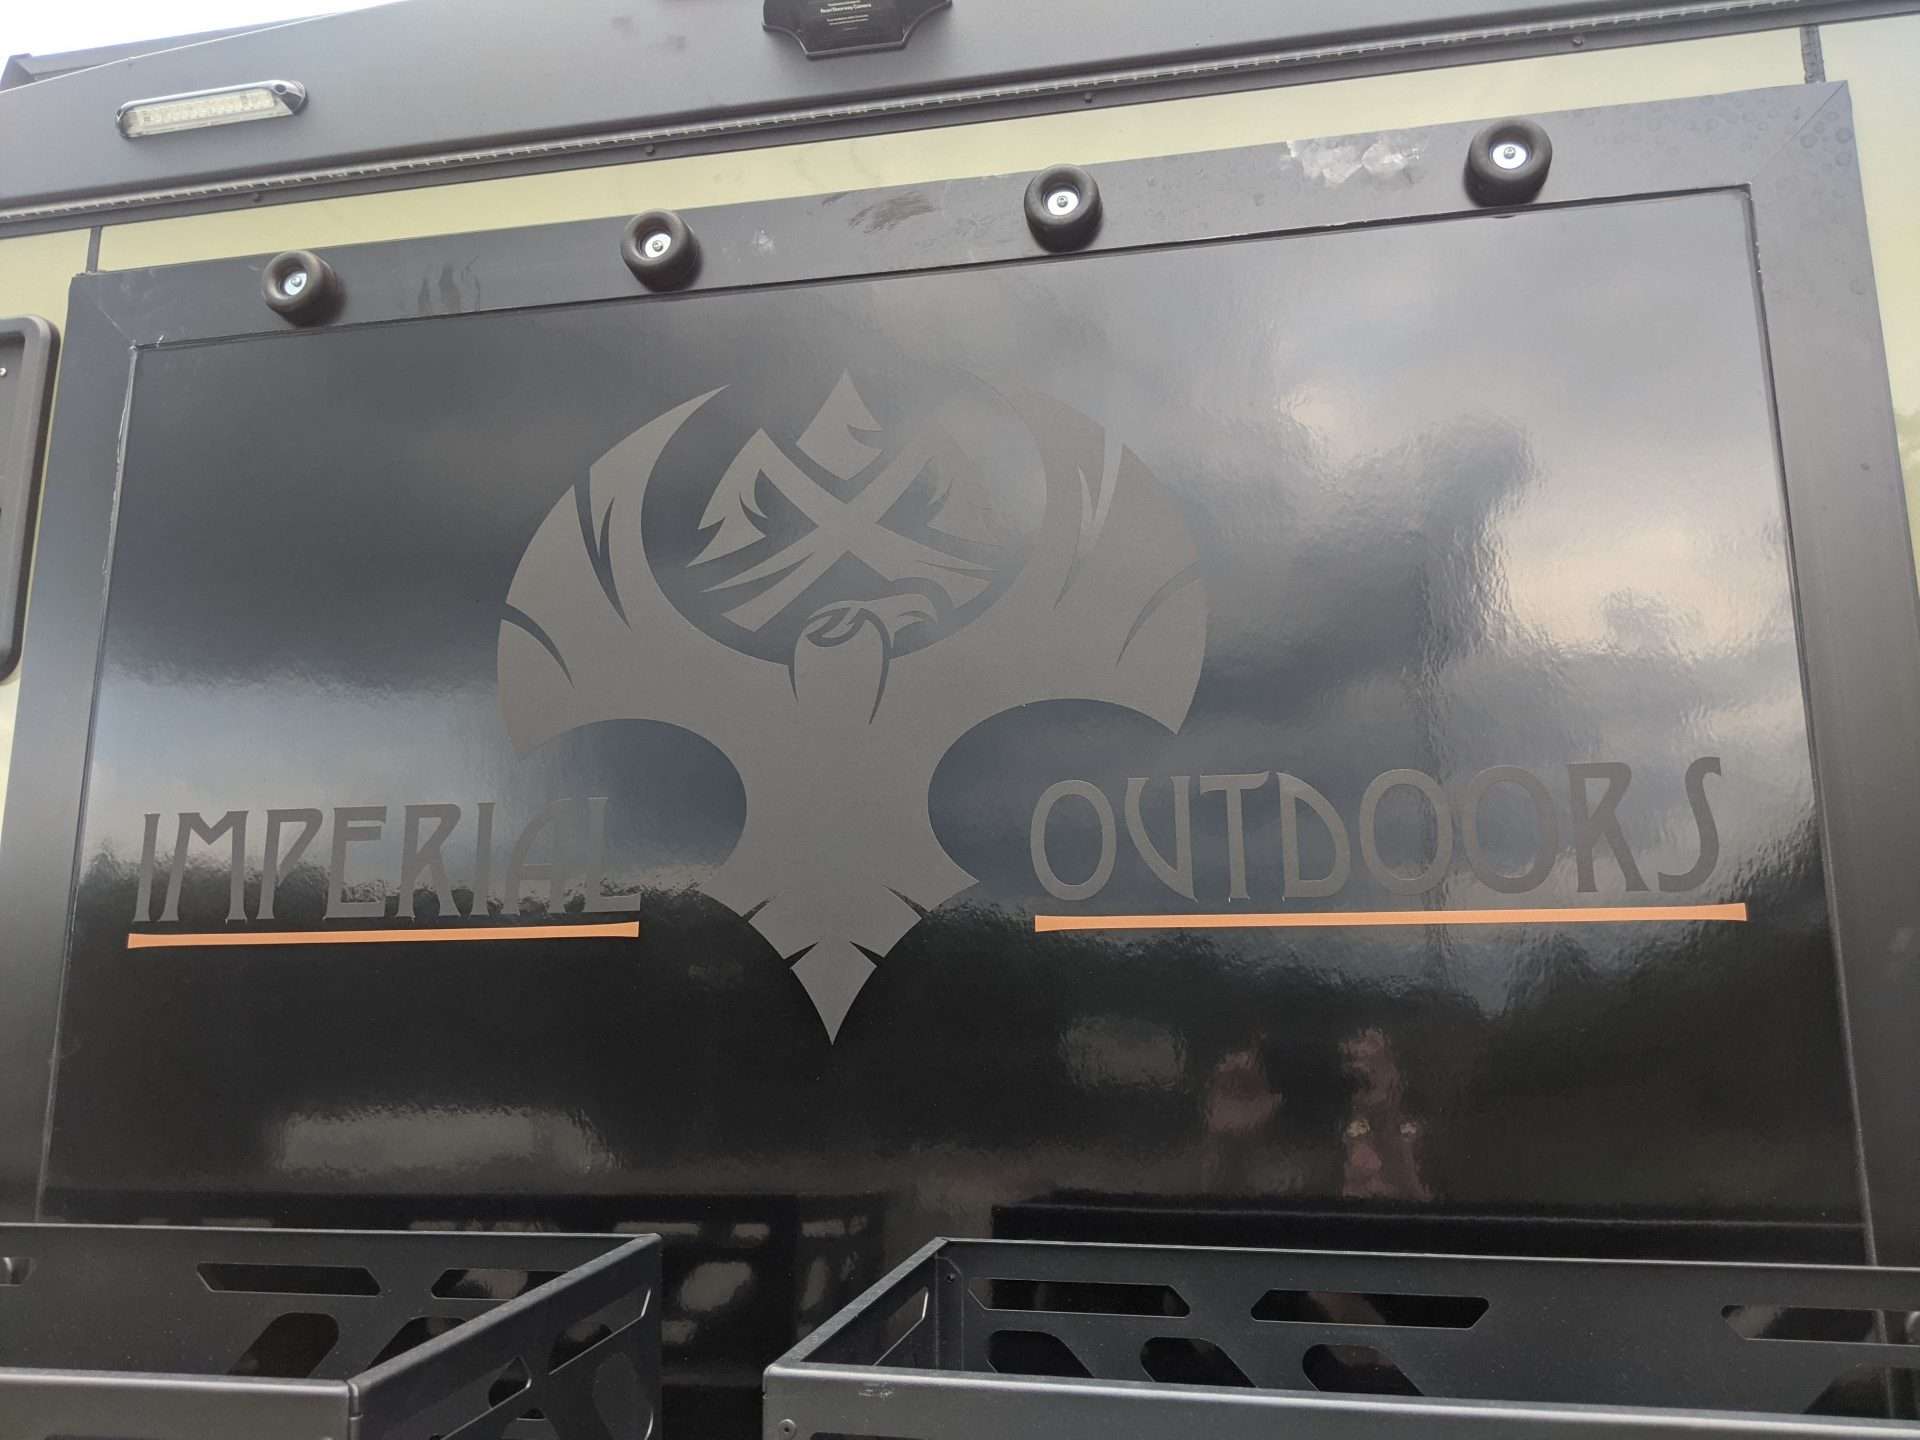 Imperial Outdoors logo on window